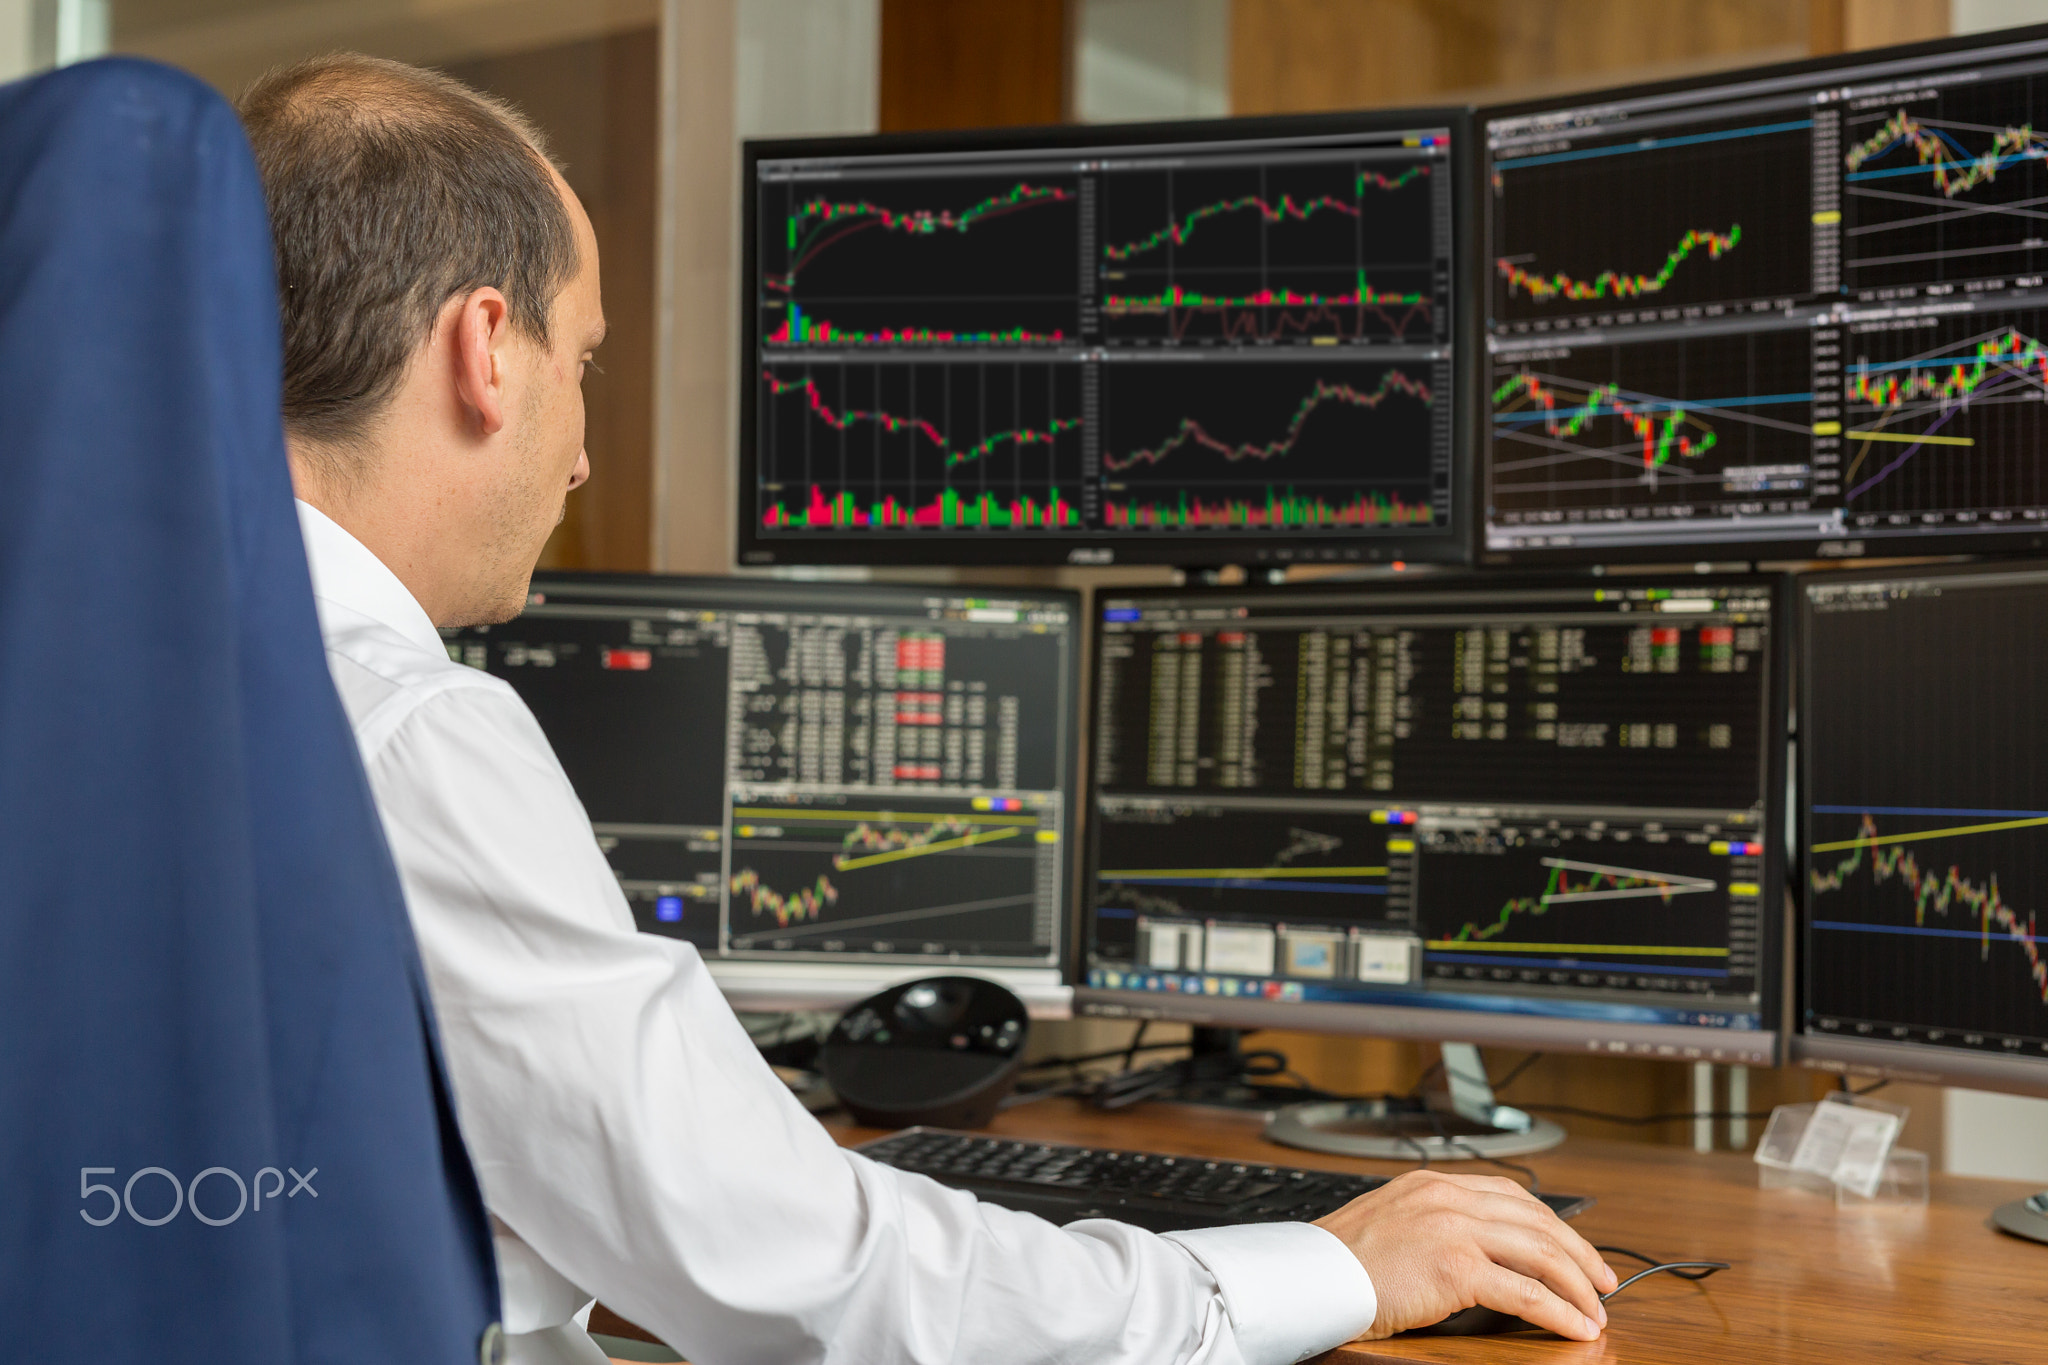 Rear view of stock trader analyzing data at multiple computer screens.